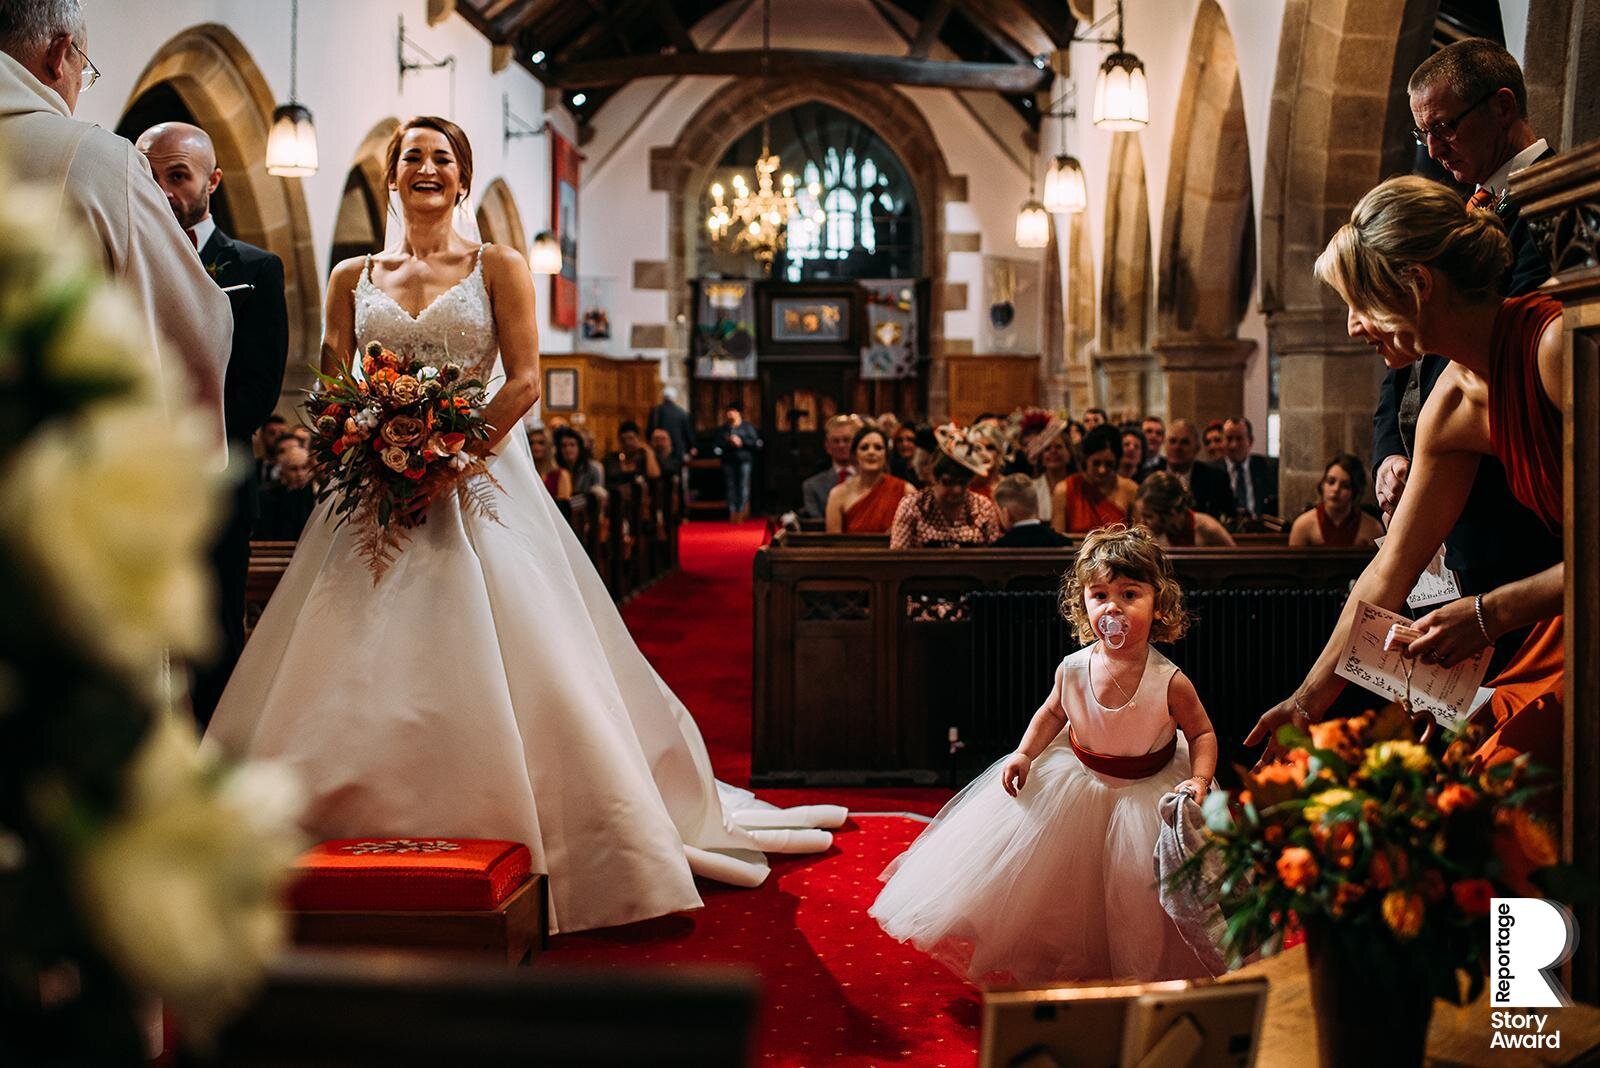  Bride laughing at her daughter during the wedding service. 